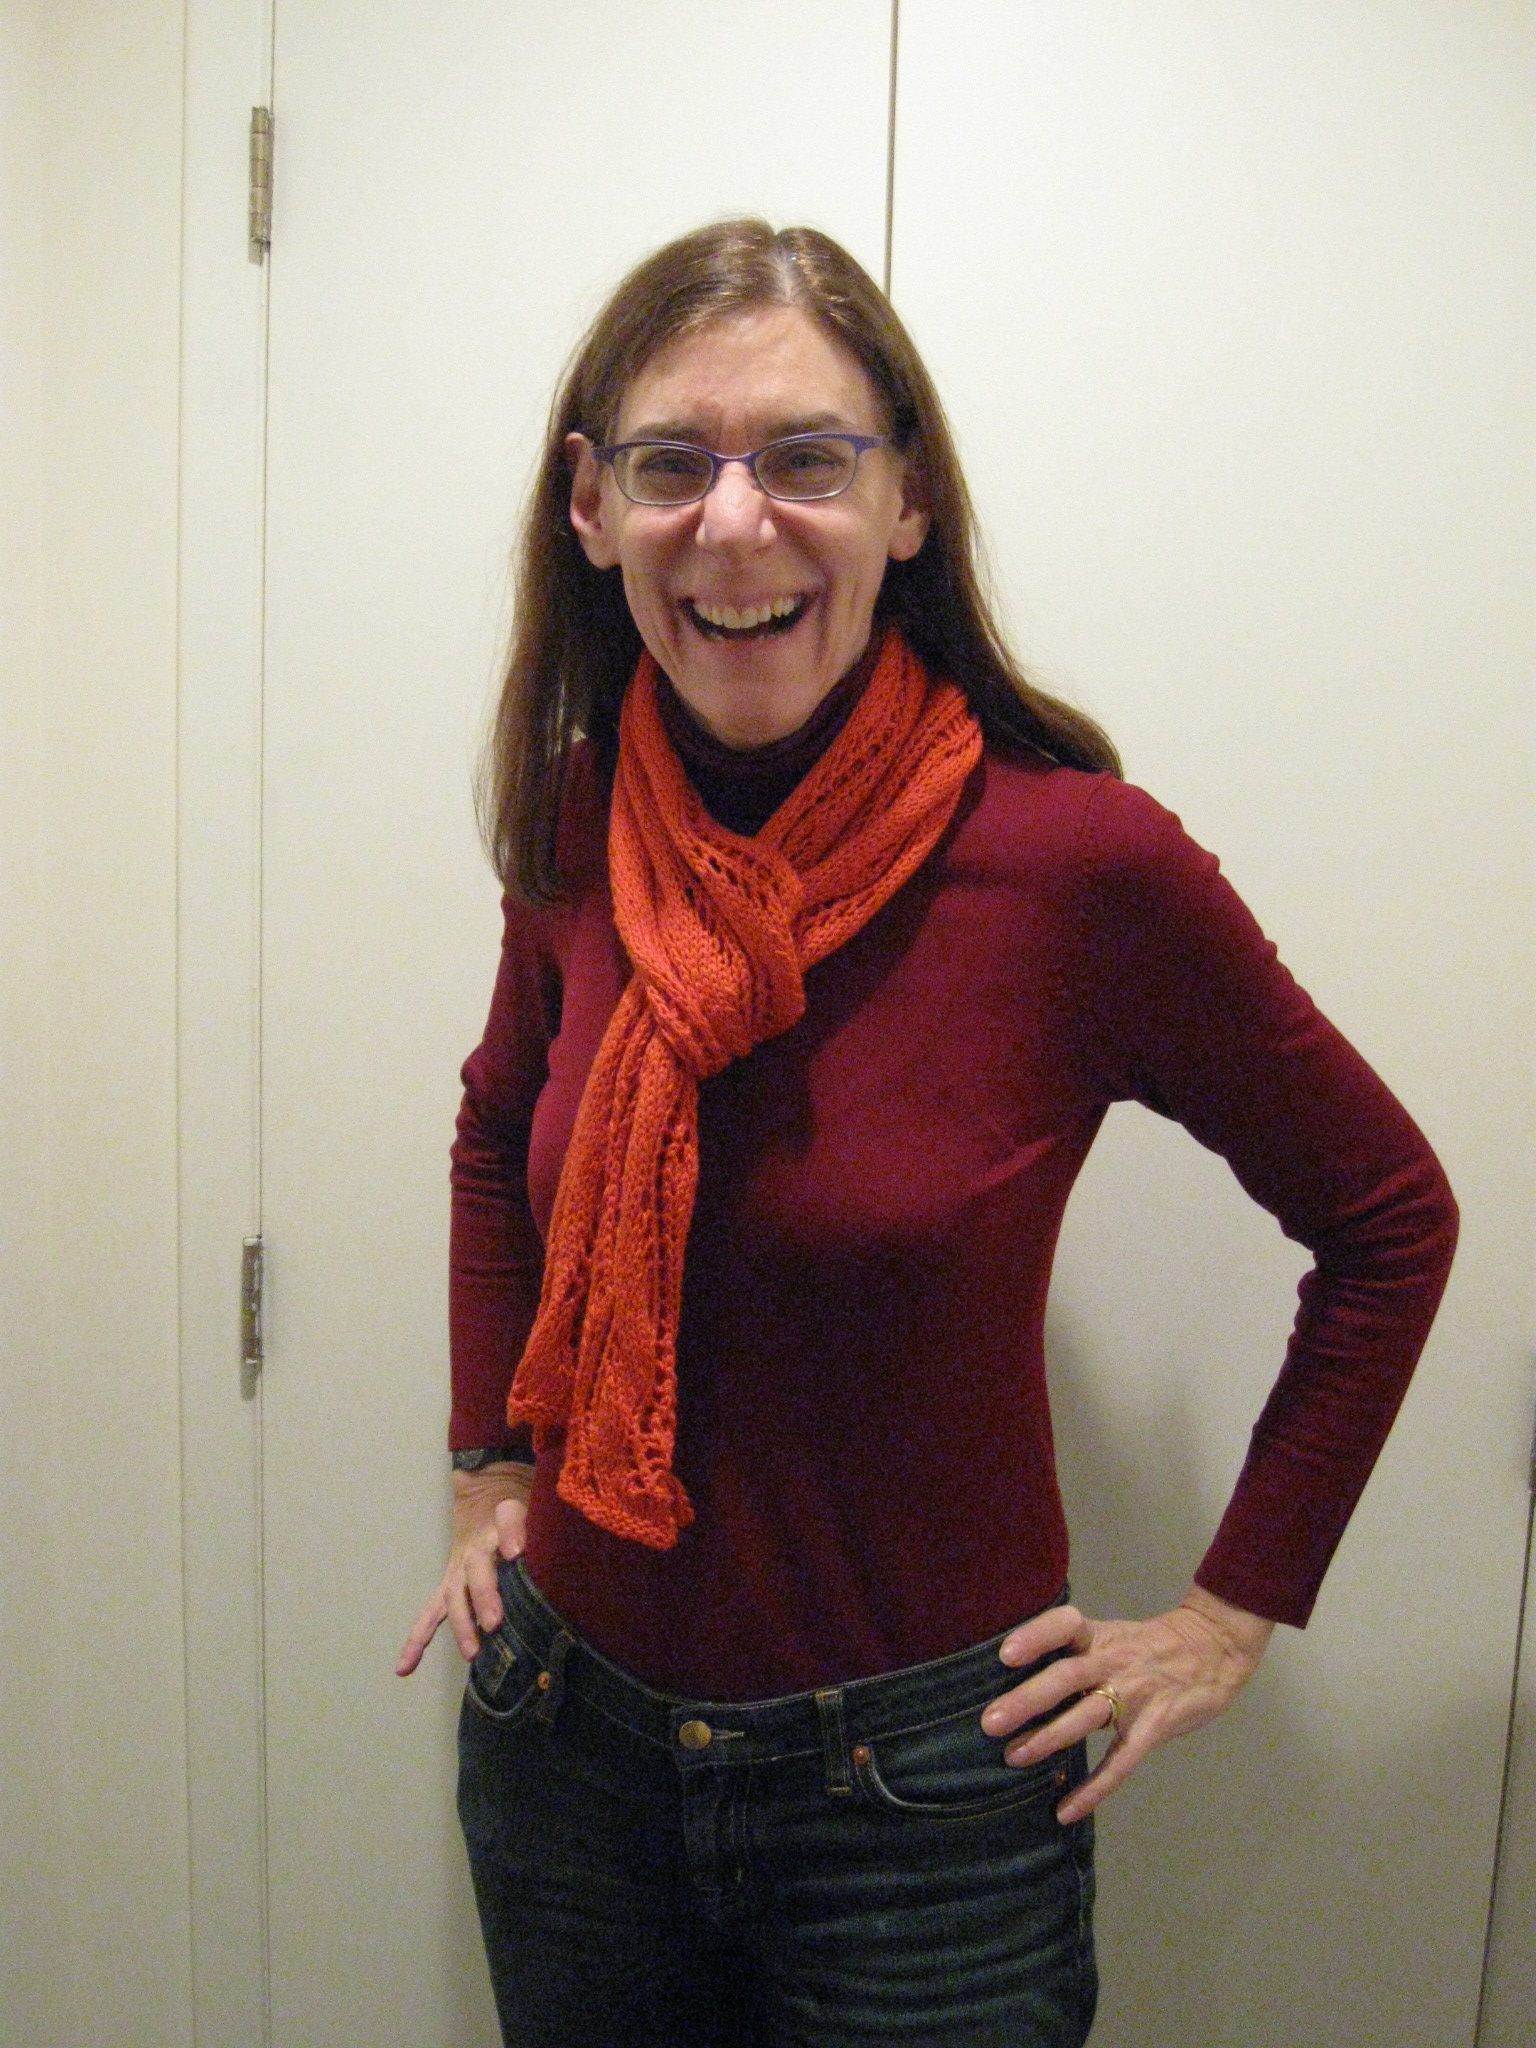 Showing off the Dreaming in Orange Lace Ribbon Scarf